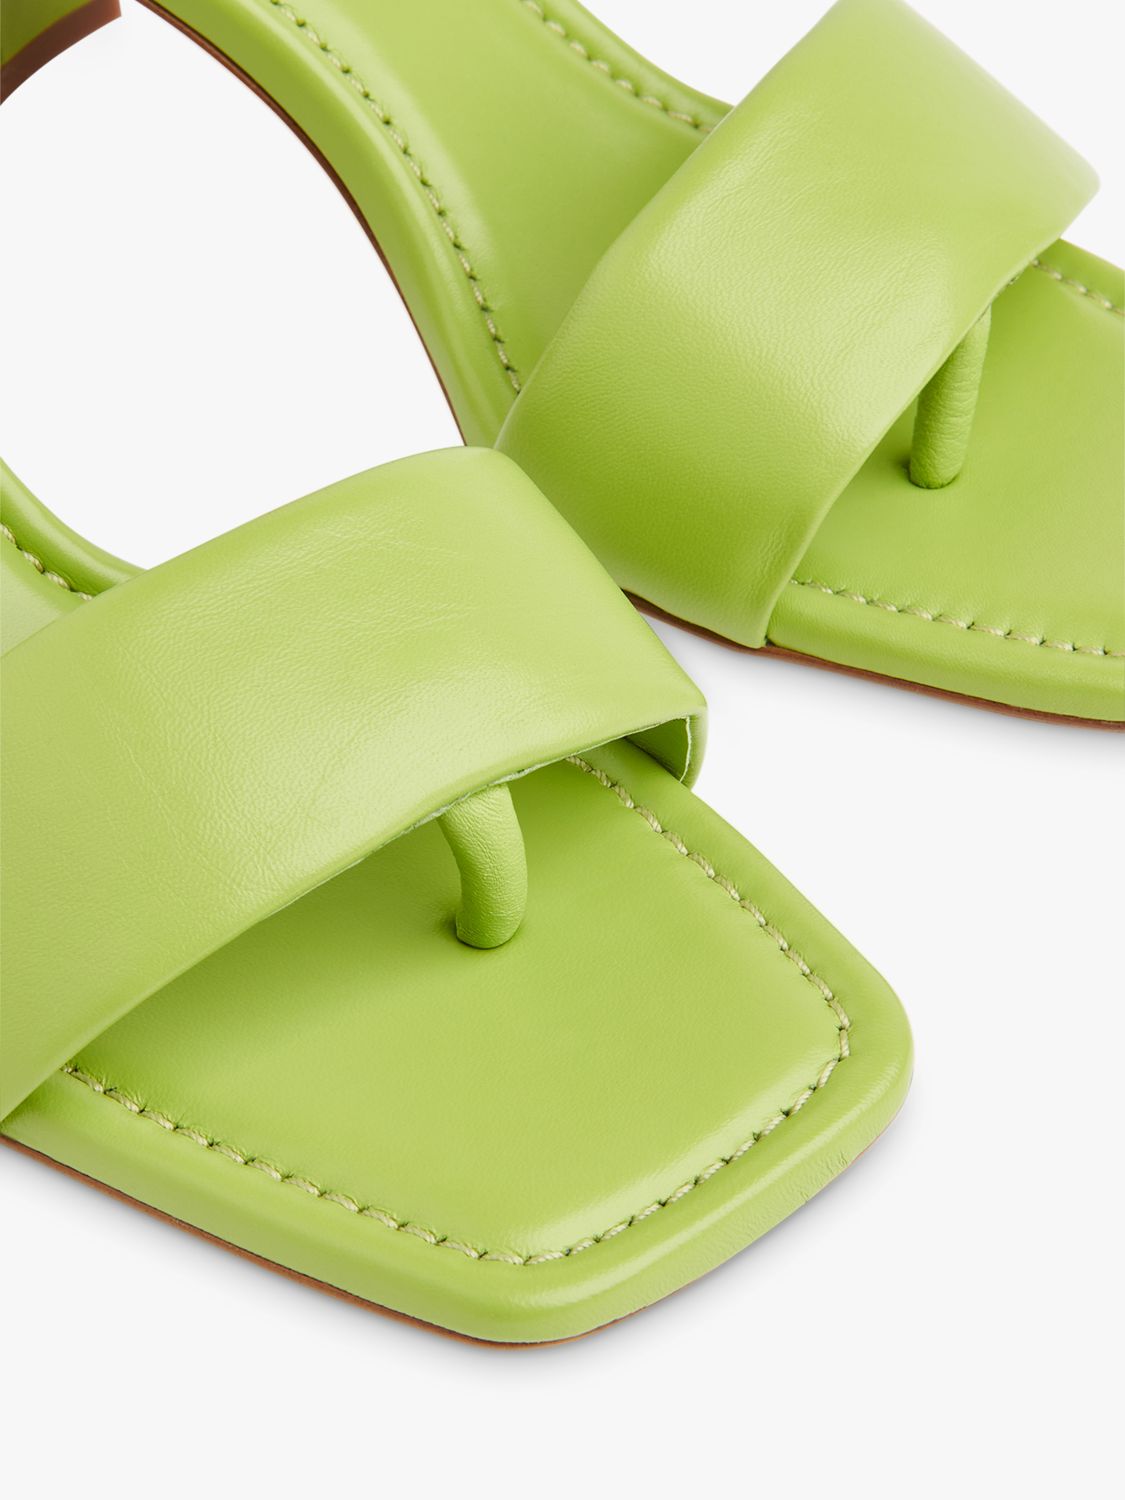 Buy Whistles Marie Slip On Leather Heeled Sandals Online at johnlewis.com